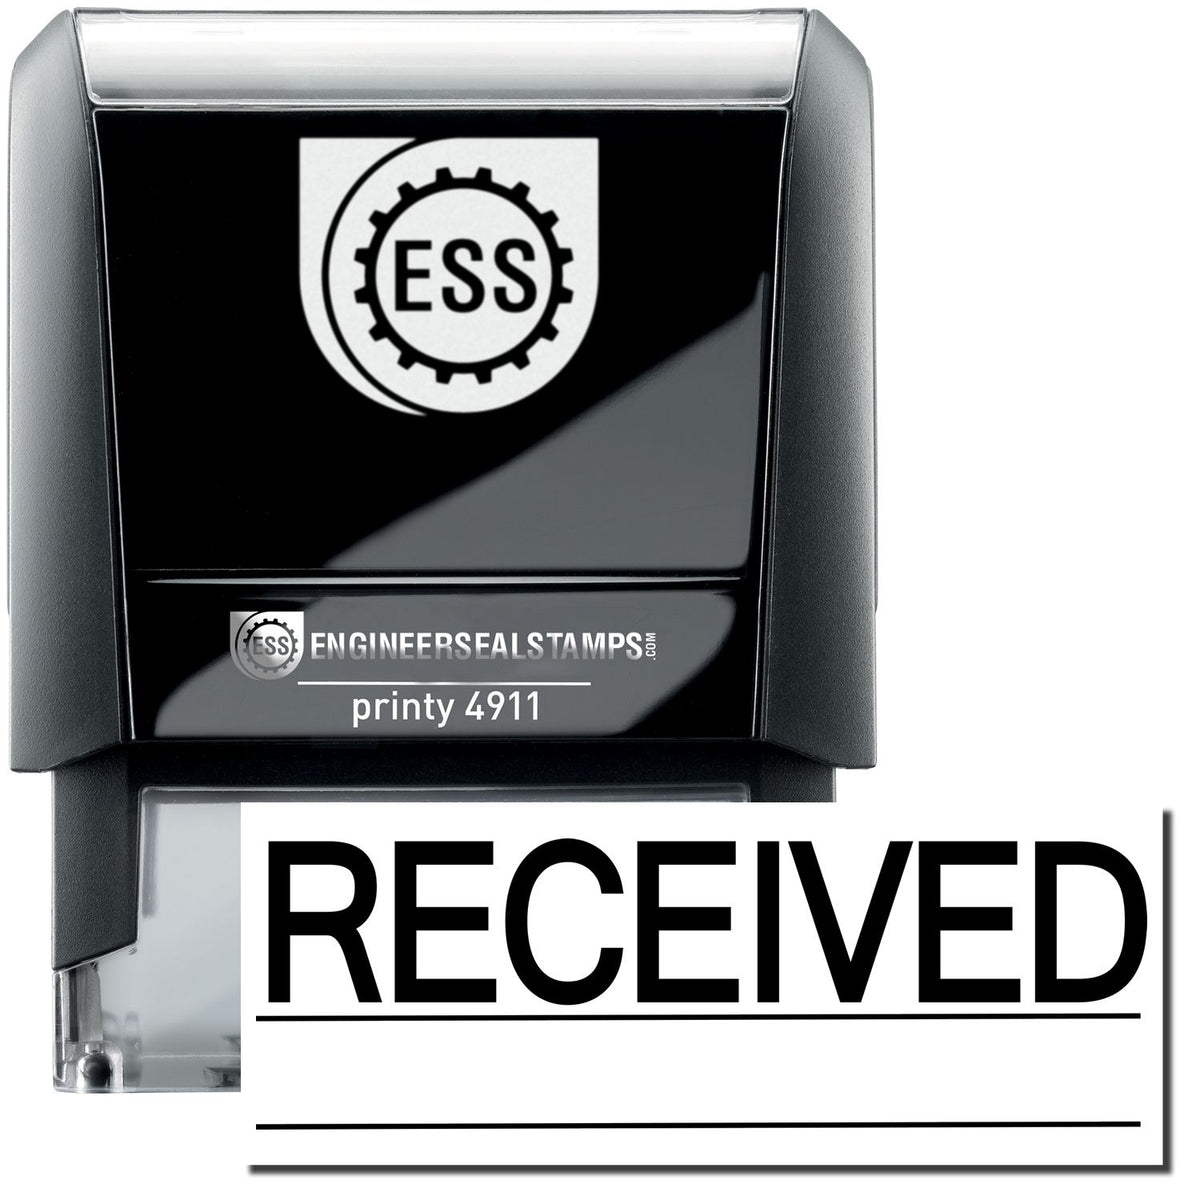 A self-inking stamp with a stamped image showing how the text &quot;RECEIVED&quot; with a line underneath the text is displayed after stamping.